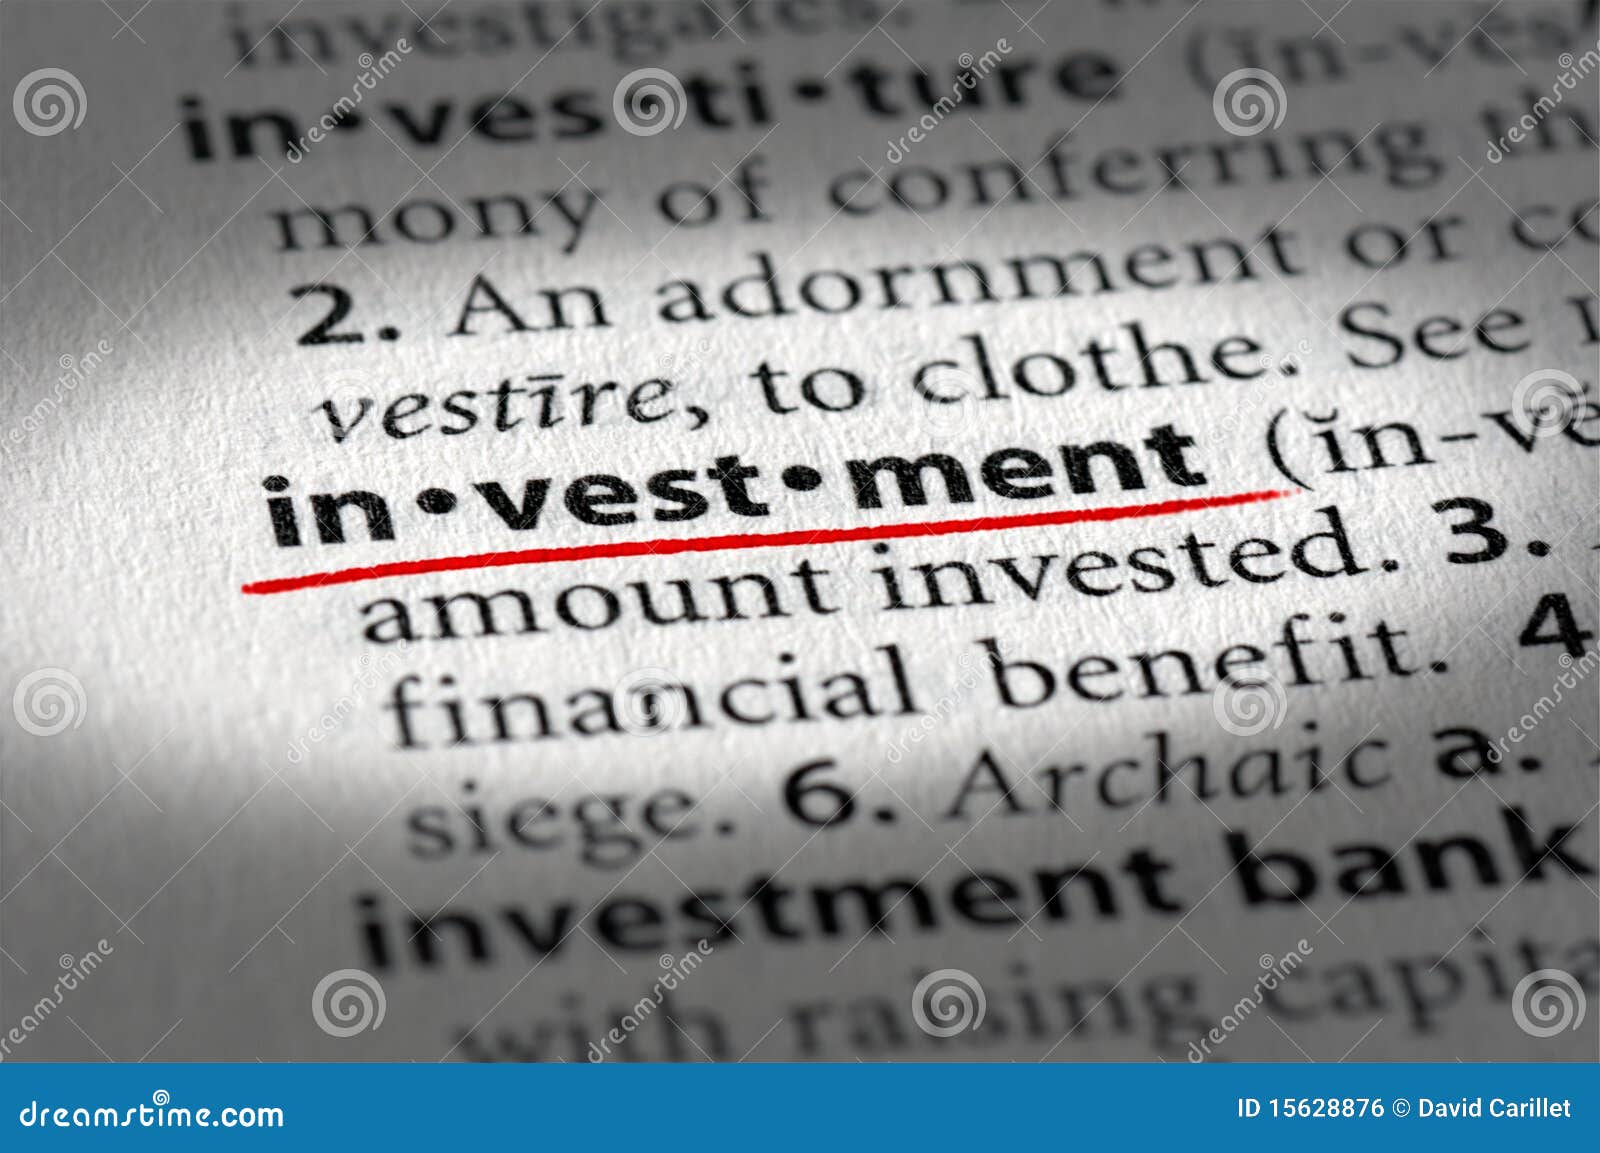 Investment Text And Definition Royalty Free Stock Image - Image: 15628876